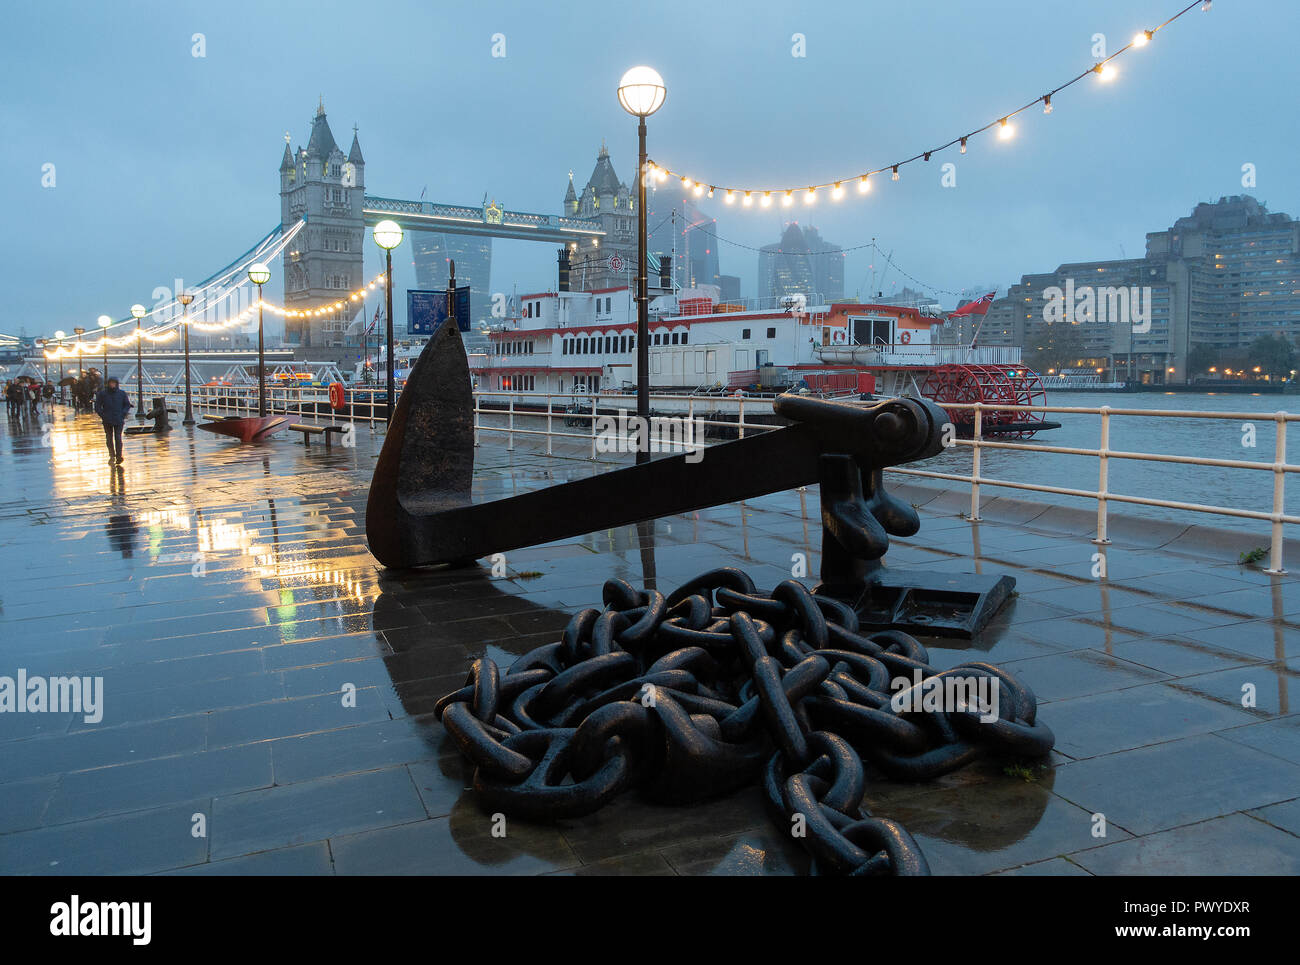 A Wet Early Evening on Butlers Wharf with the Dixie Queen Paddle Steamer, Large Chain and Anchor, Tower Bridge on South Bank River Thames London UK Stock Photo